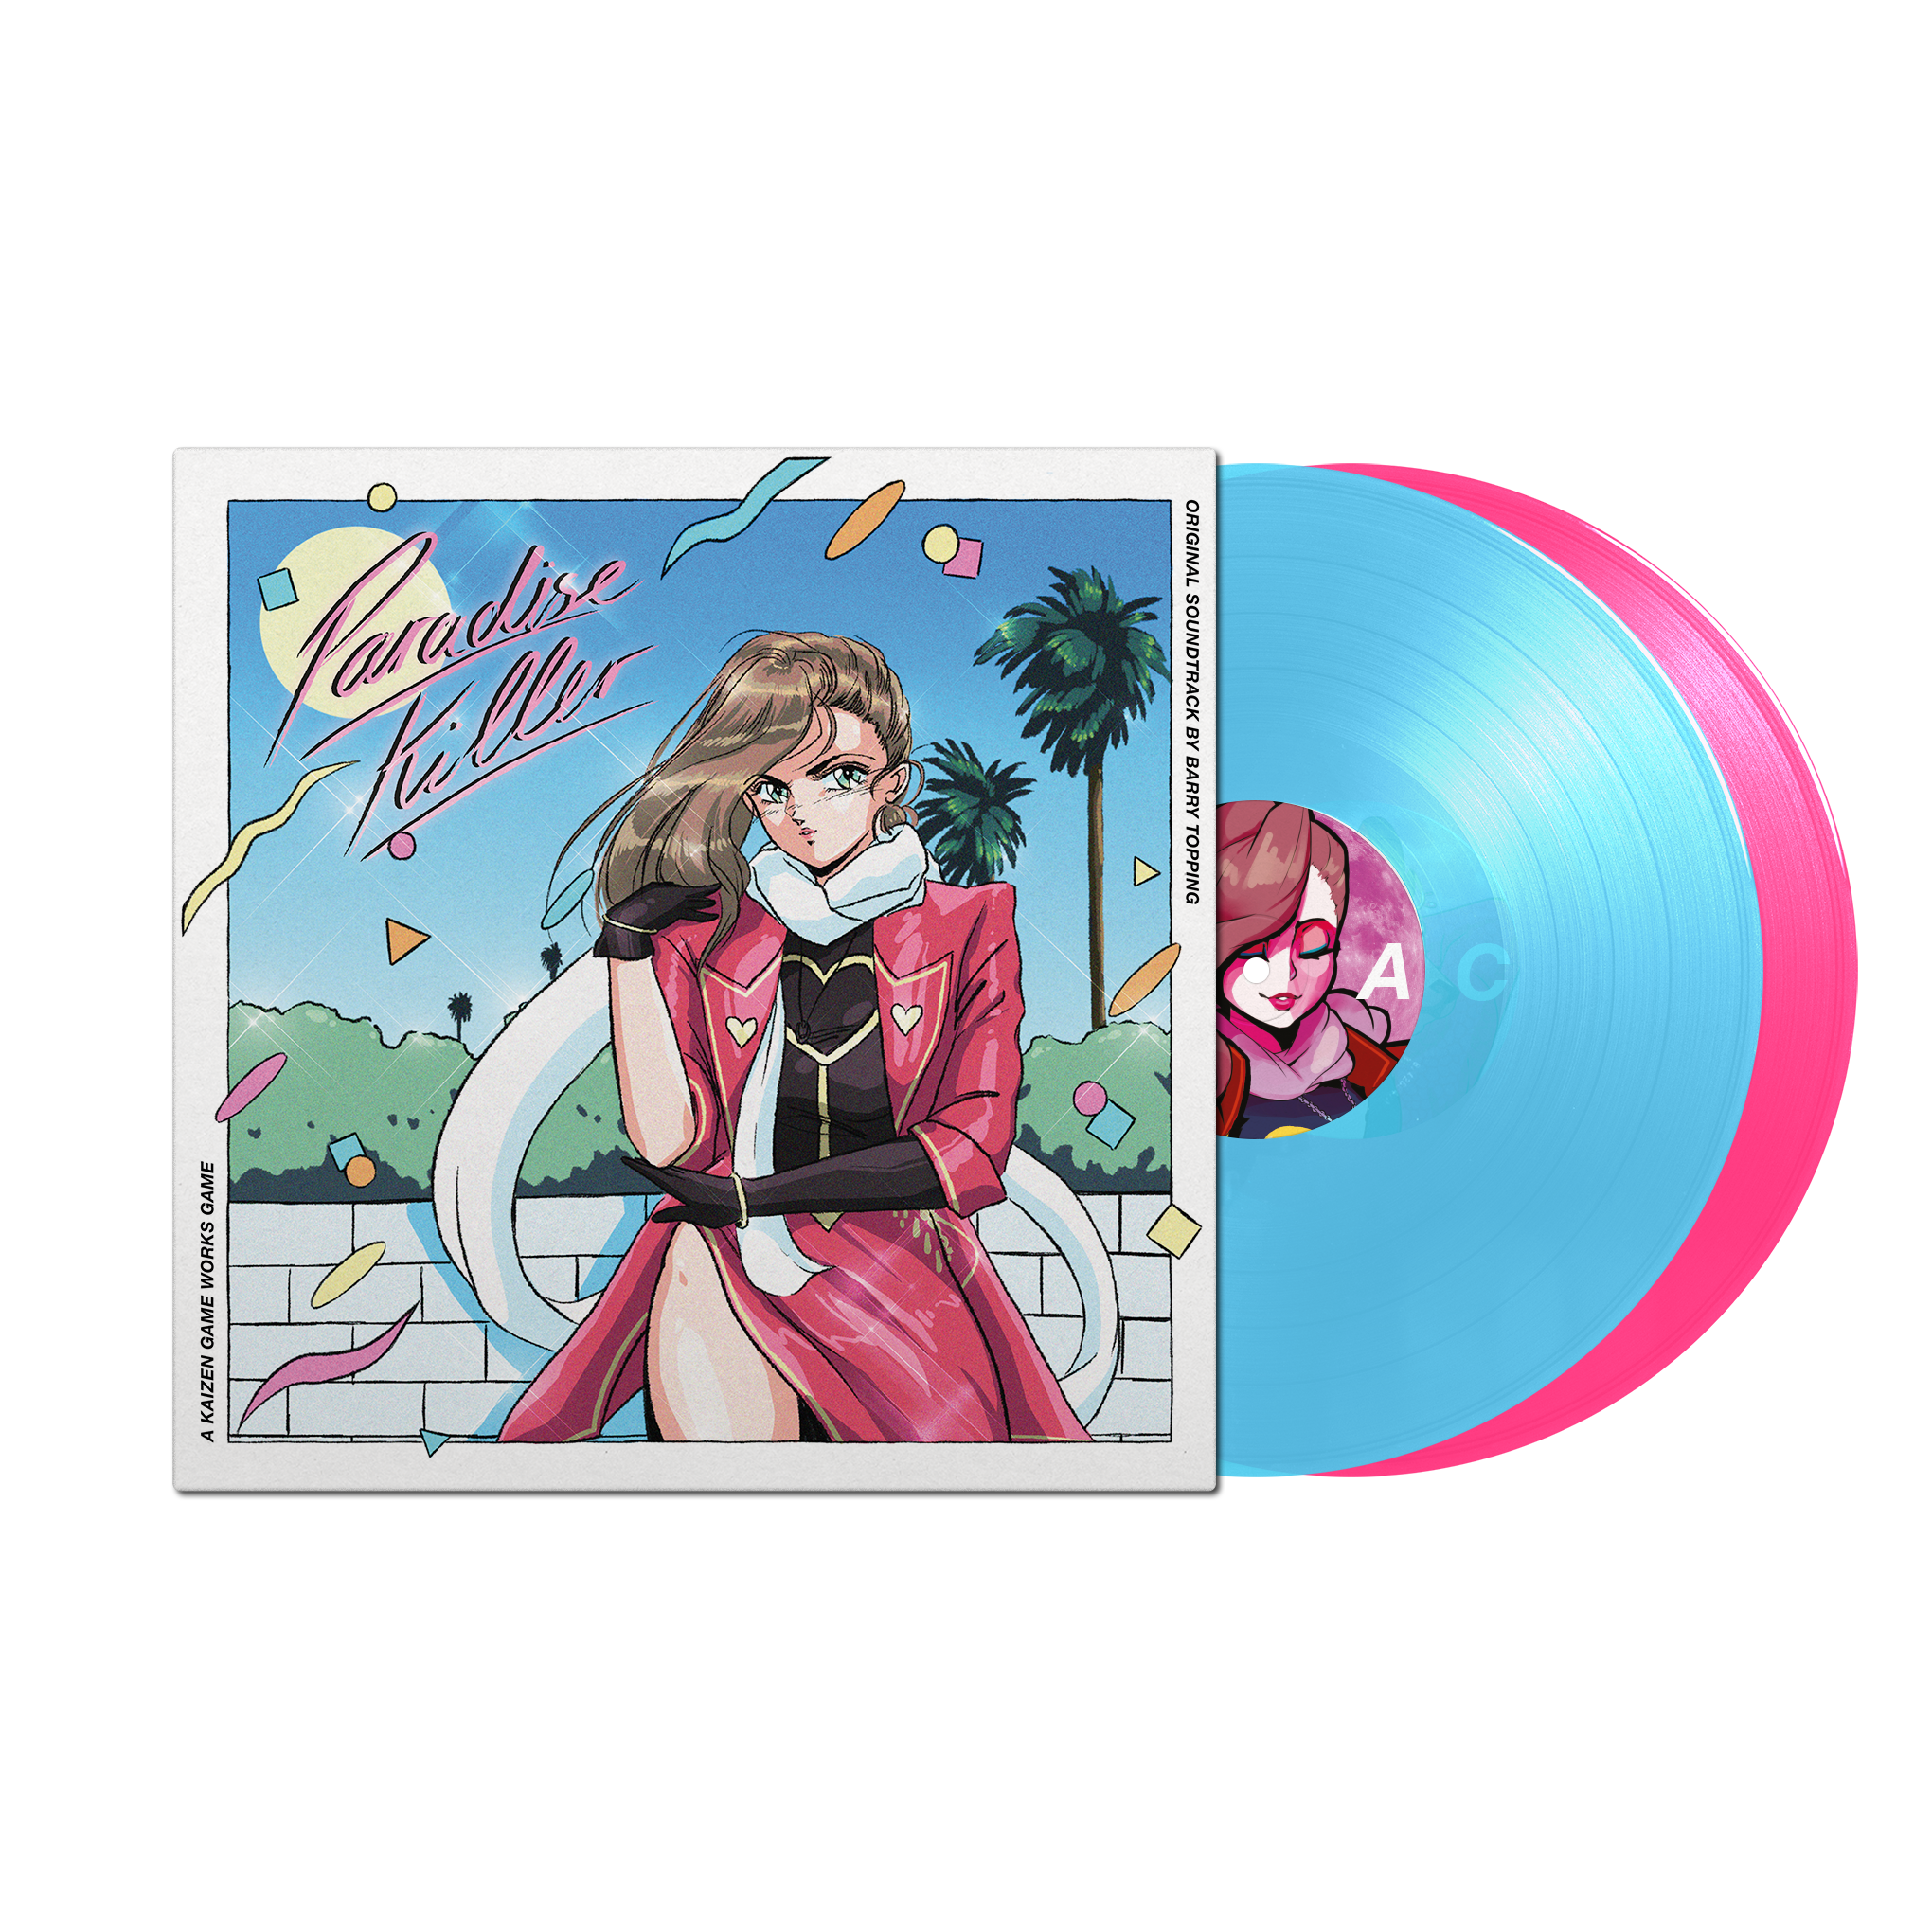 Paradise Killer on curacao and pink vinyl